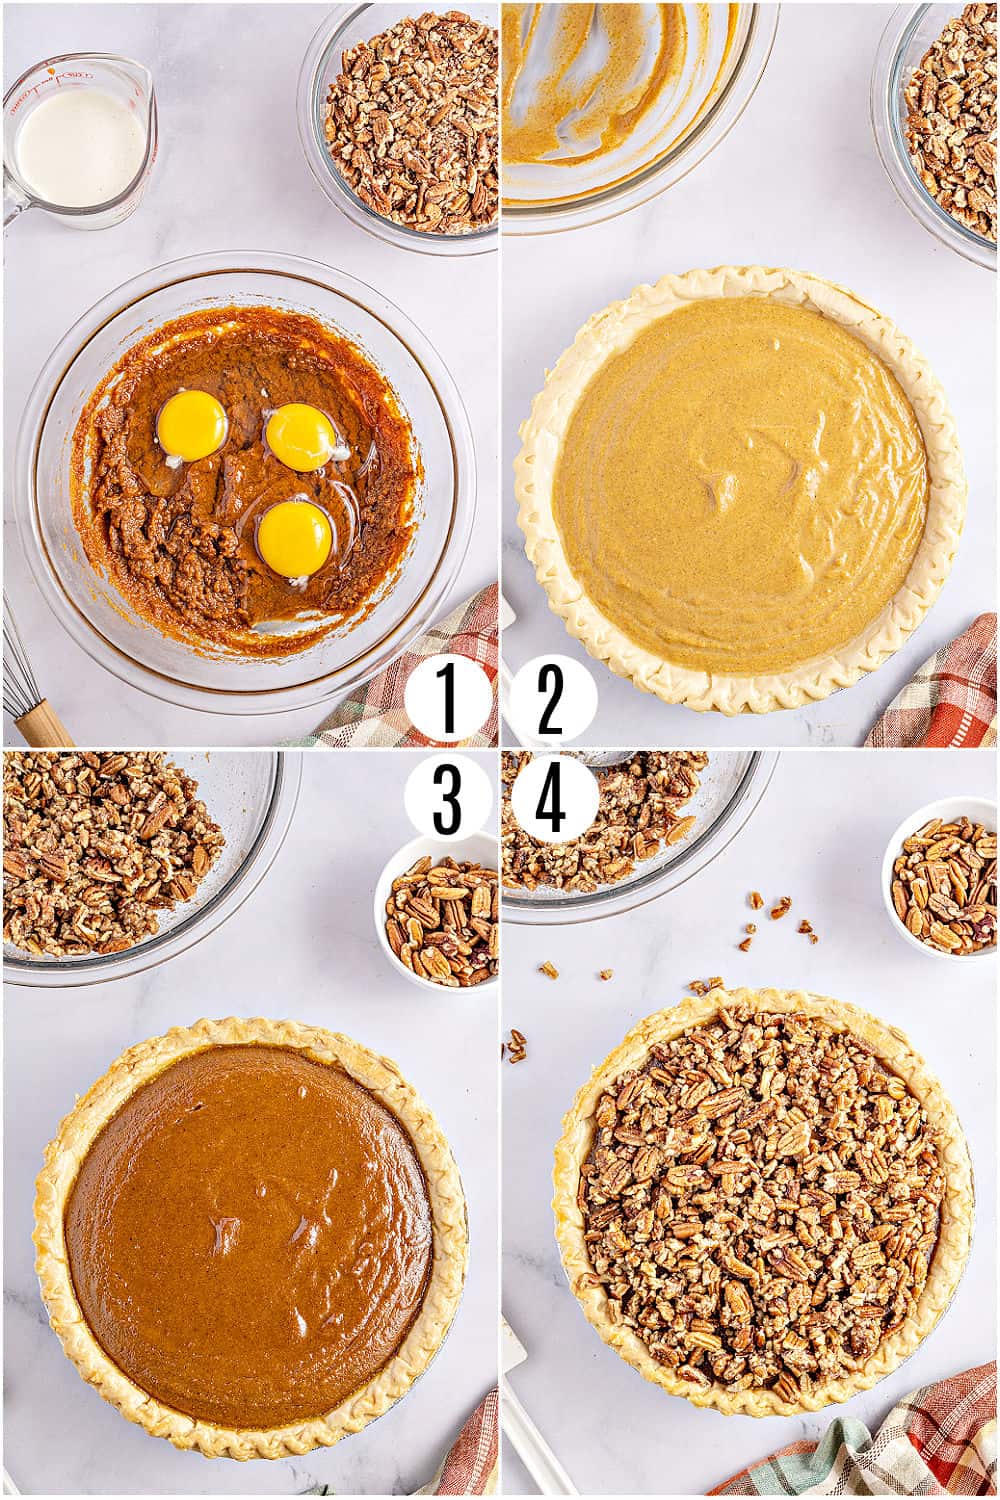 Step by step photos showing how to make pecan pumpkin pie.